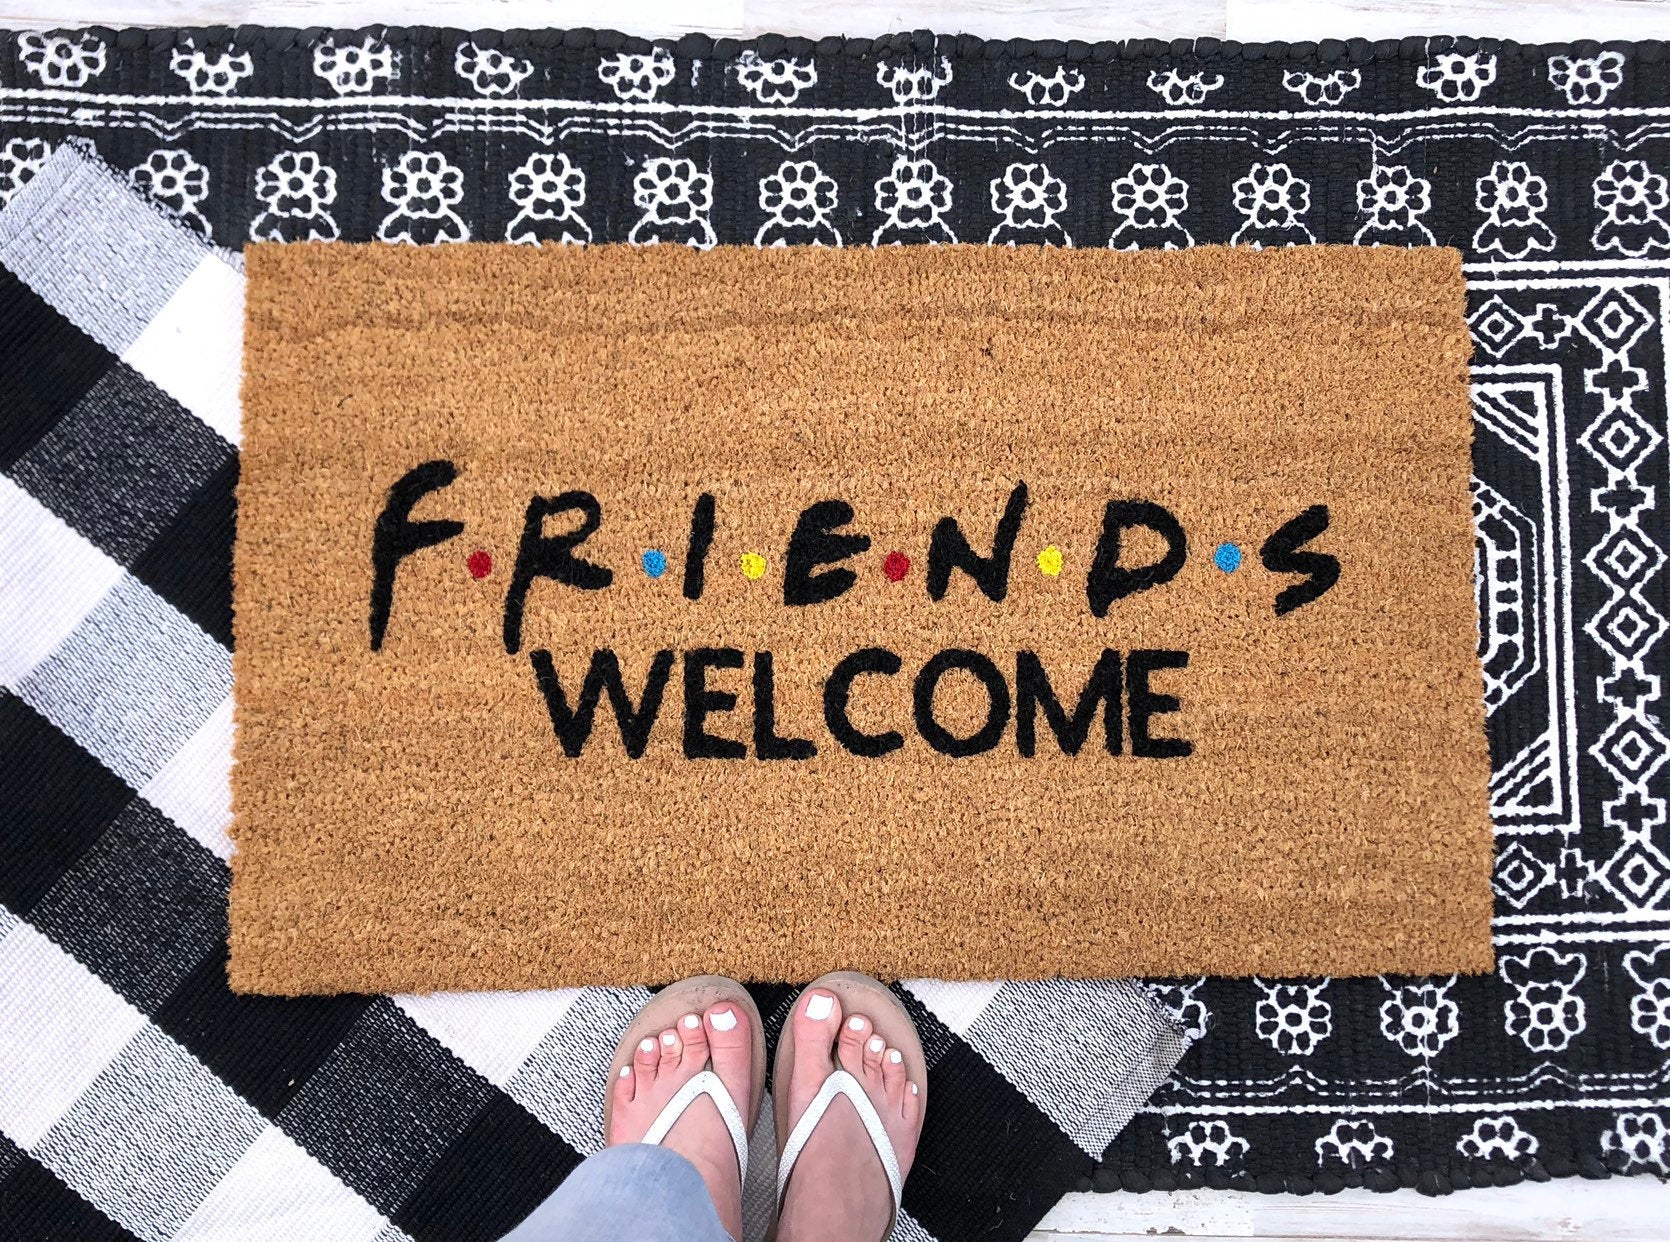 Amazon.com: LXOMILL Friends TV Show Merchandise, Friends TV Show Kitchen  Towels, Funny Friends Merch Gifts Kitchen Decor, Friends Themed Gifts,  Birthday Housewarming Gifts for Friends Fans : Home & Kitchen